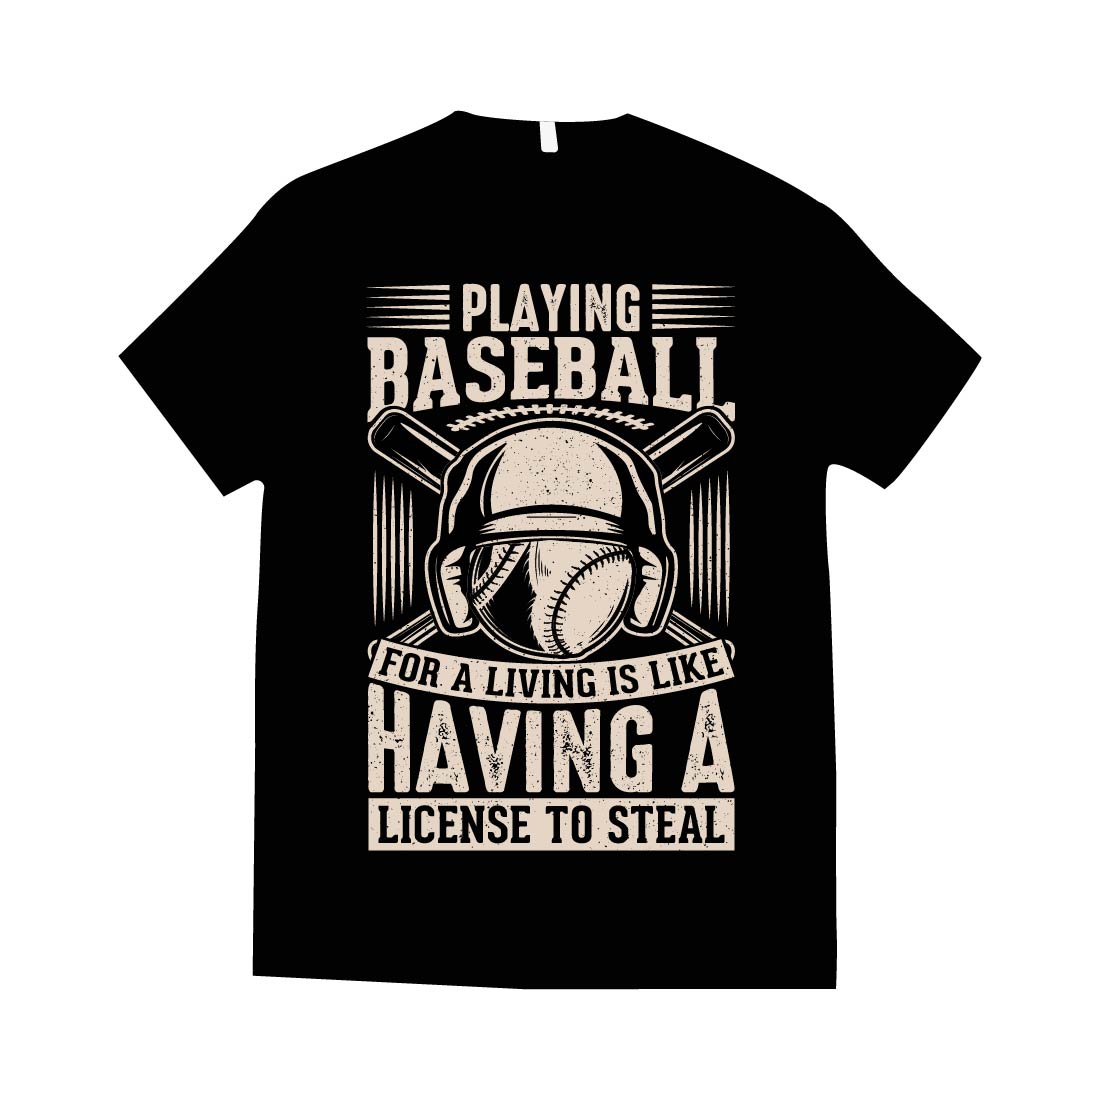 Baseball T-shirt Design, Playing baseball for a living is like having a license to steal preview image.